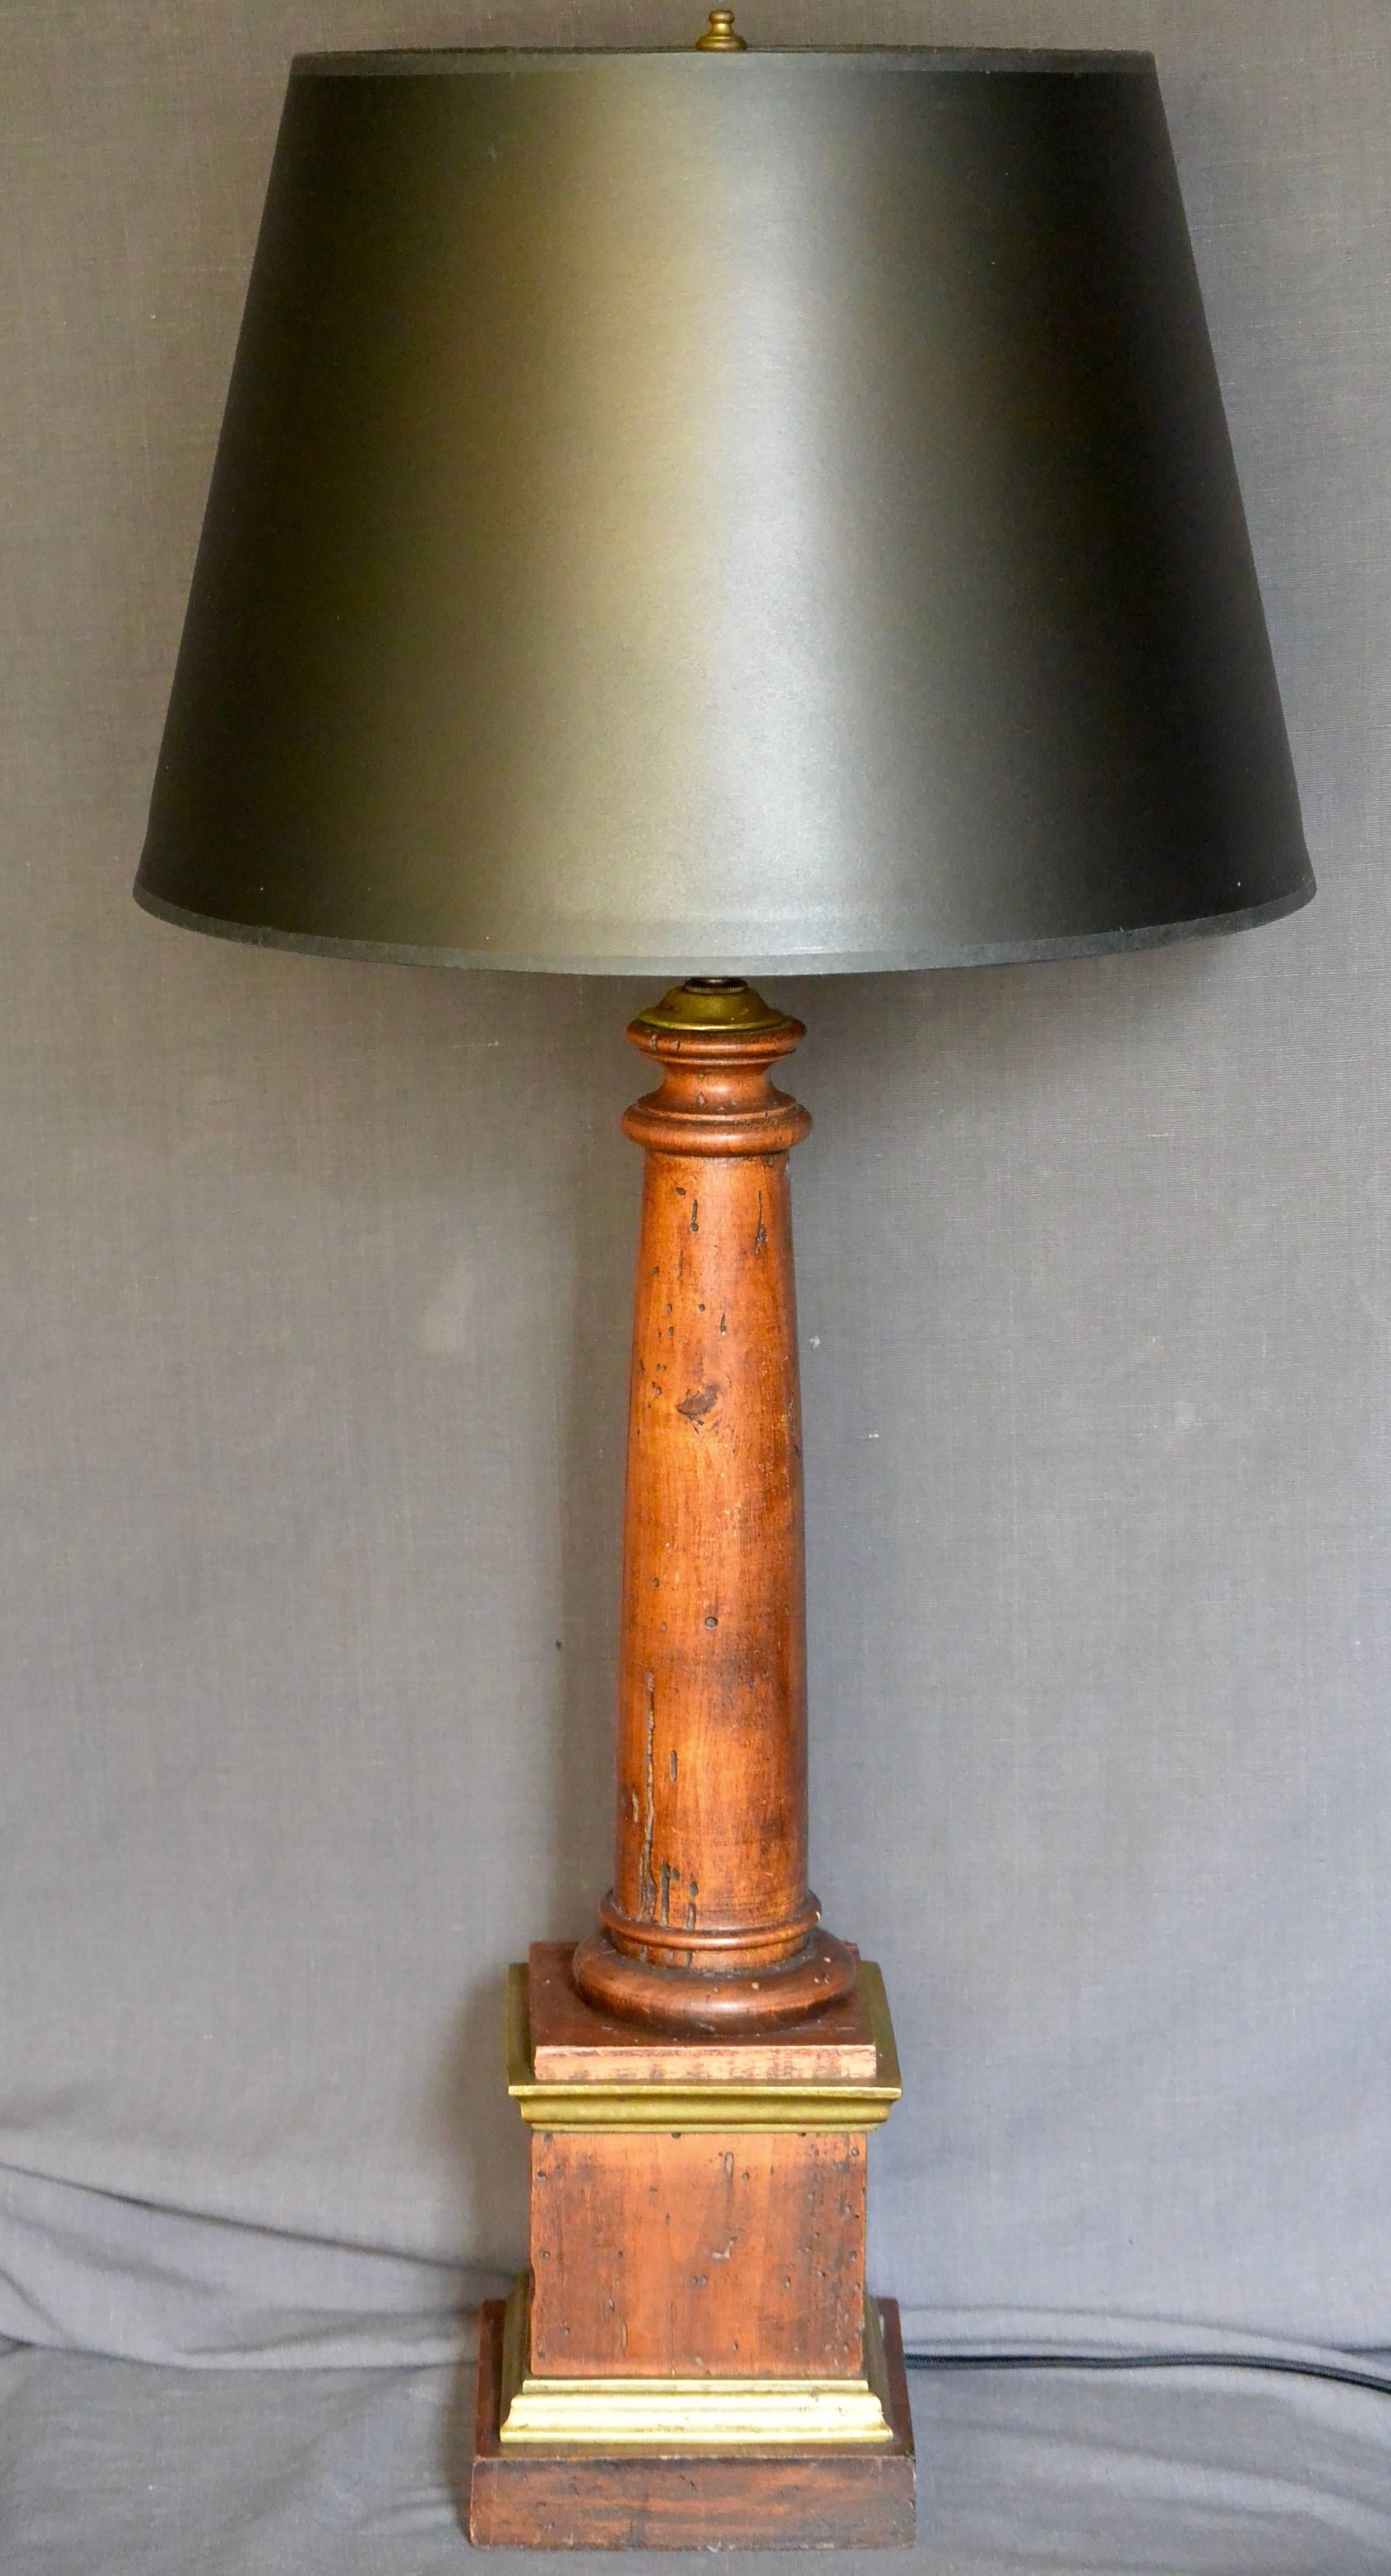 Italian wood column lamp. Vintage neoclassical style columnar double light table lamp on pedestal with brass fittings. Newly electrified with black silk cord. Vintage gold lined black card shade optional. 
Dimensions: 5.5